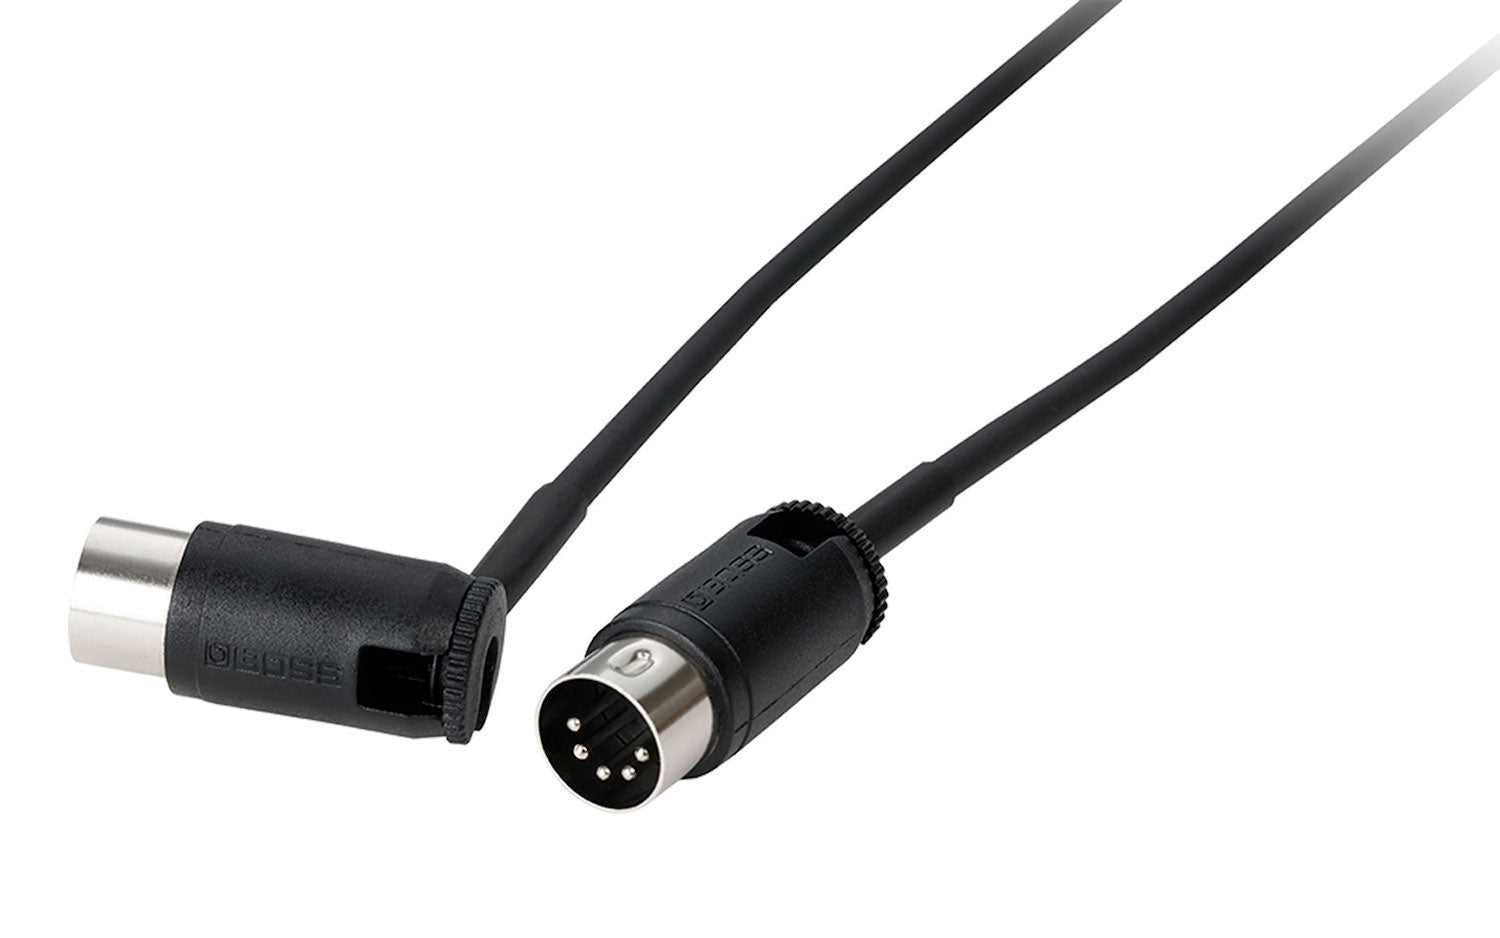 Boss Multi-directional MIDI Cable - 3ft